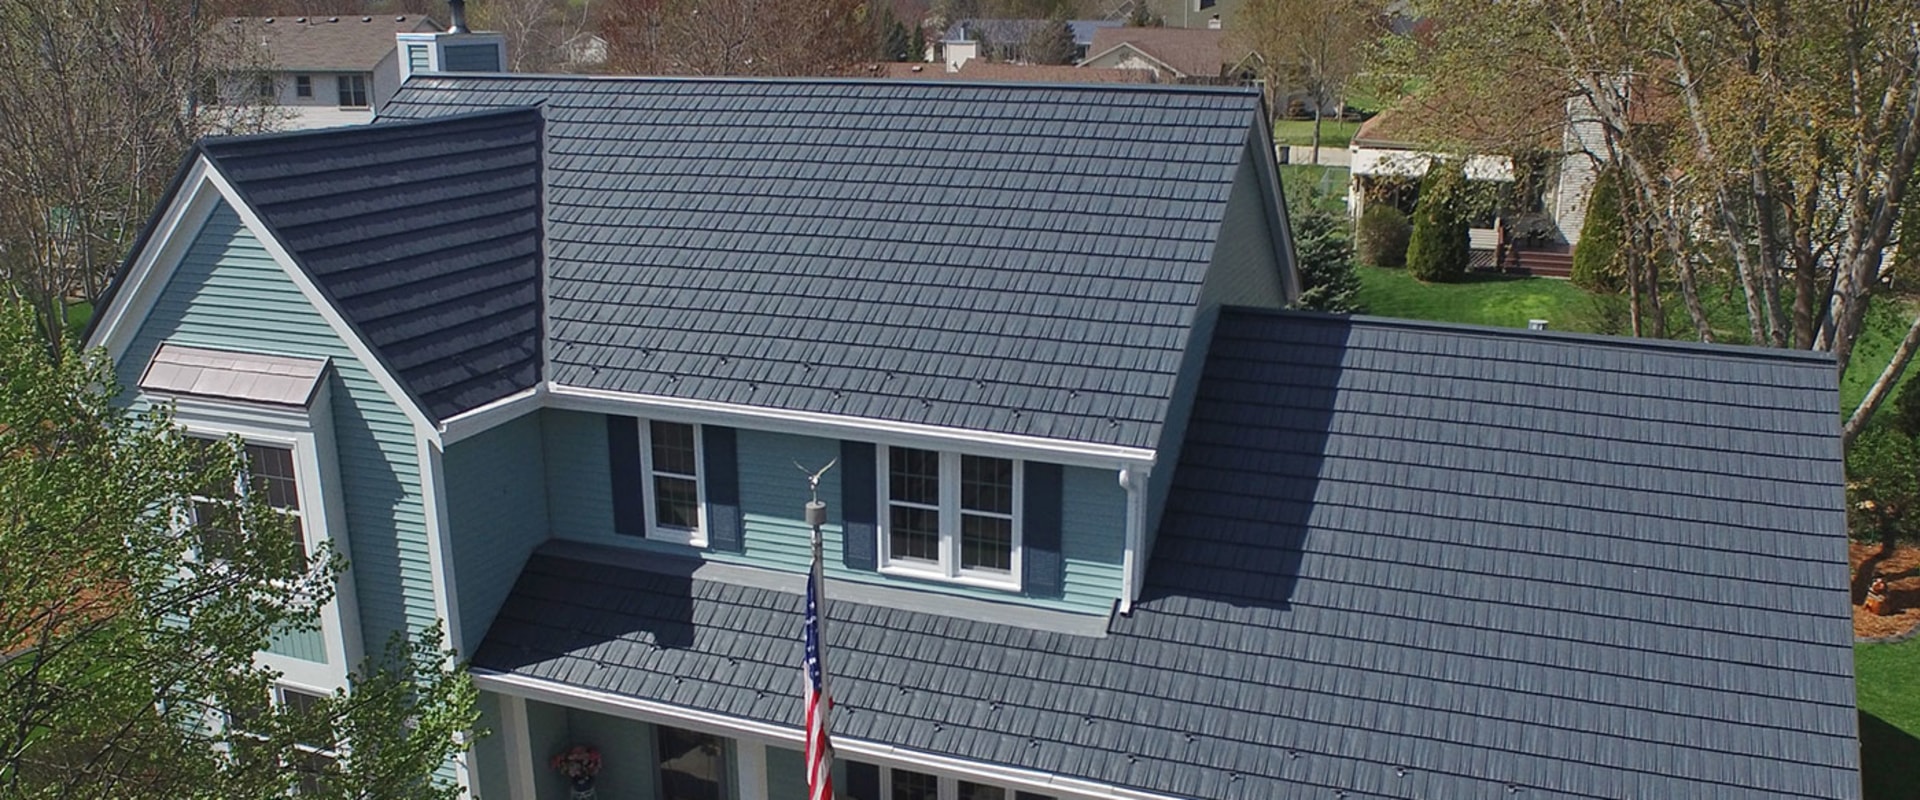 10 Tips to Make Your Roof Replacement Stress-Free